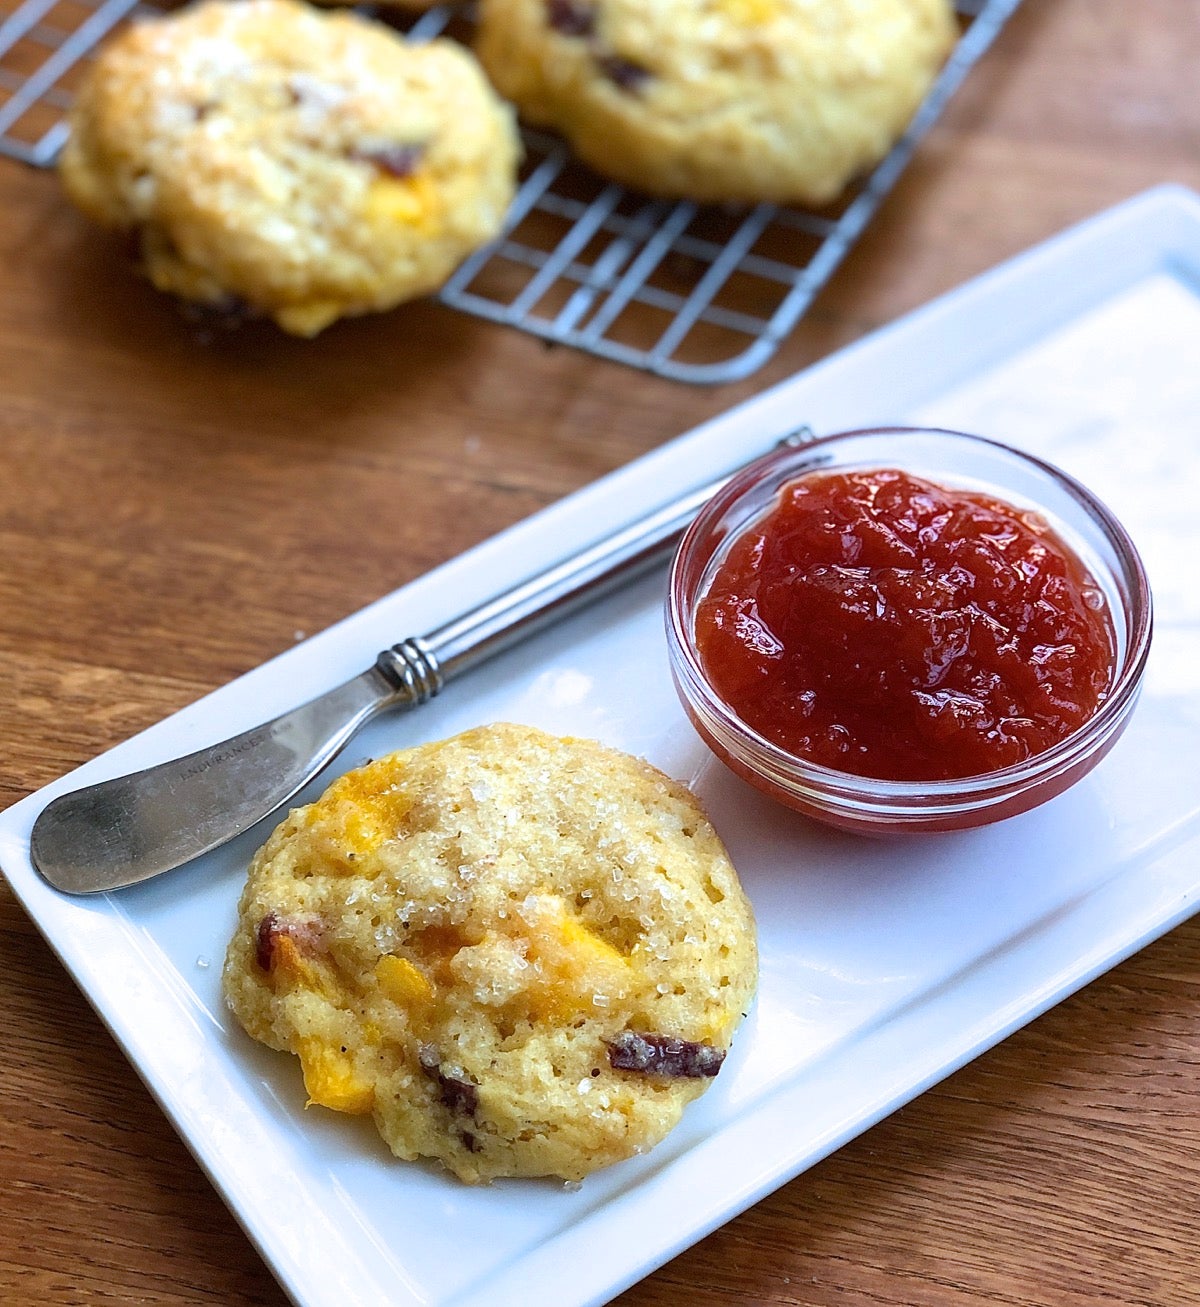 A peach scone on a plate with a butter knife and bowl of peach preserves, ready to enjoy.